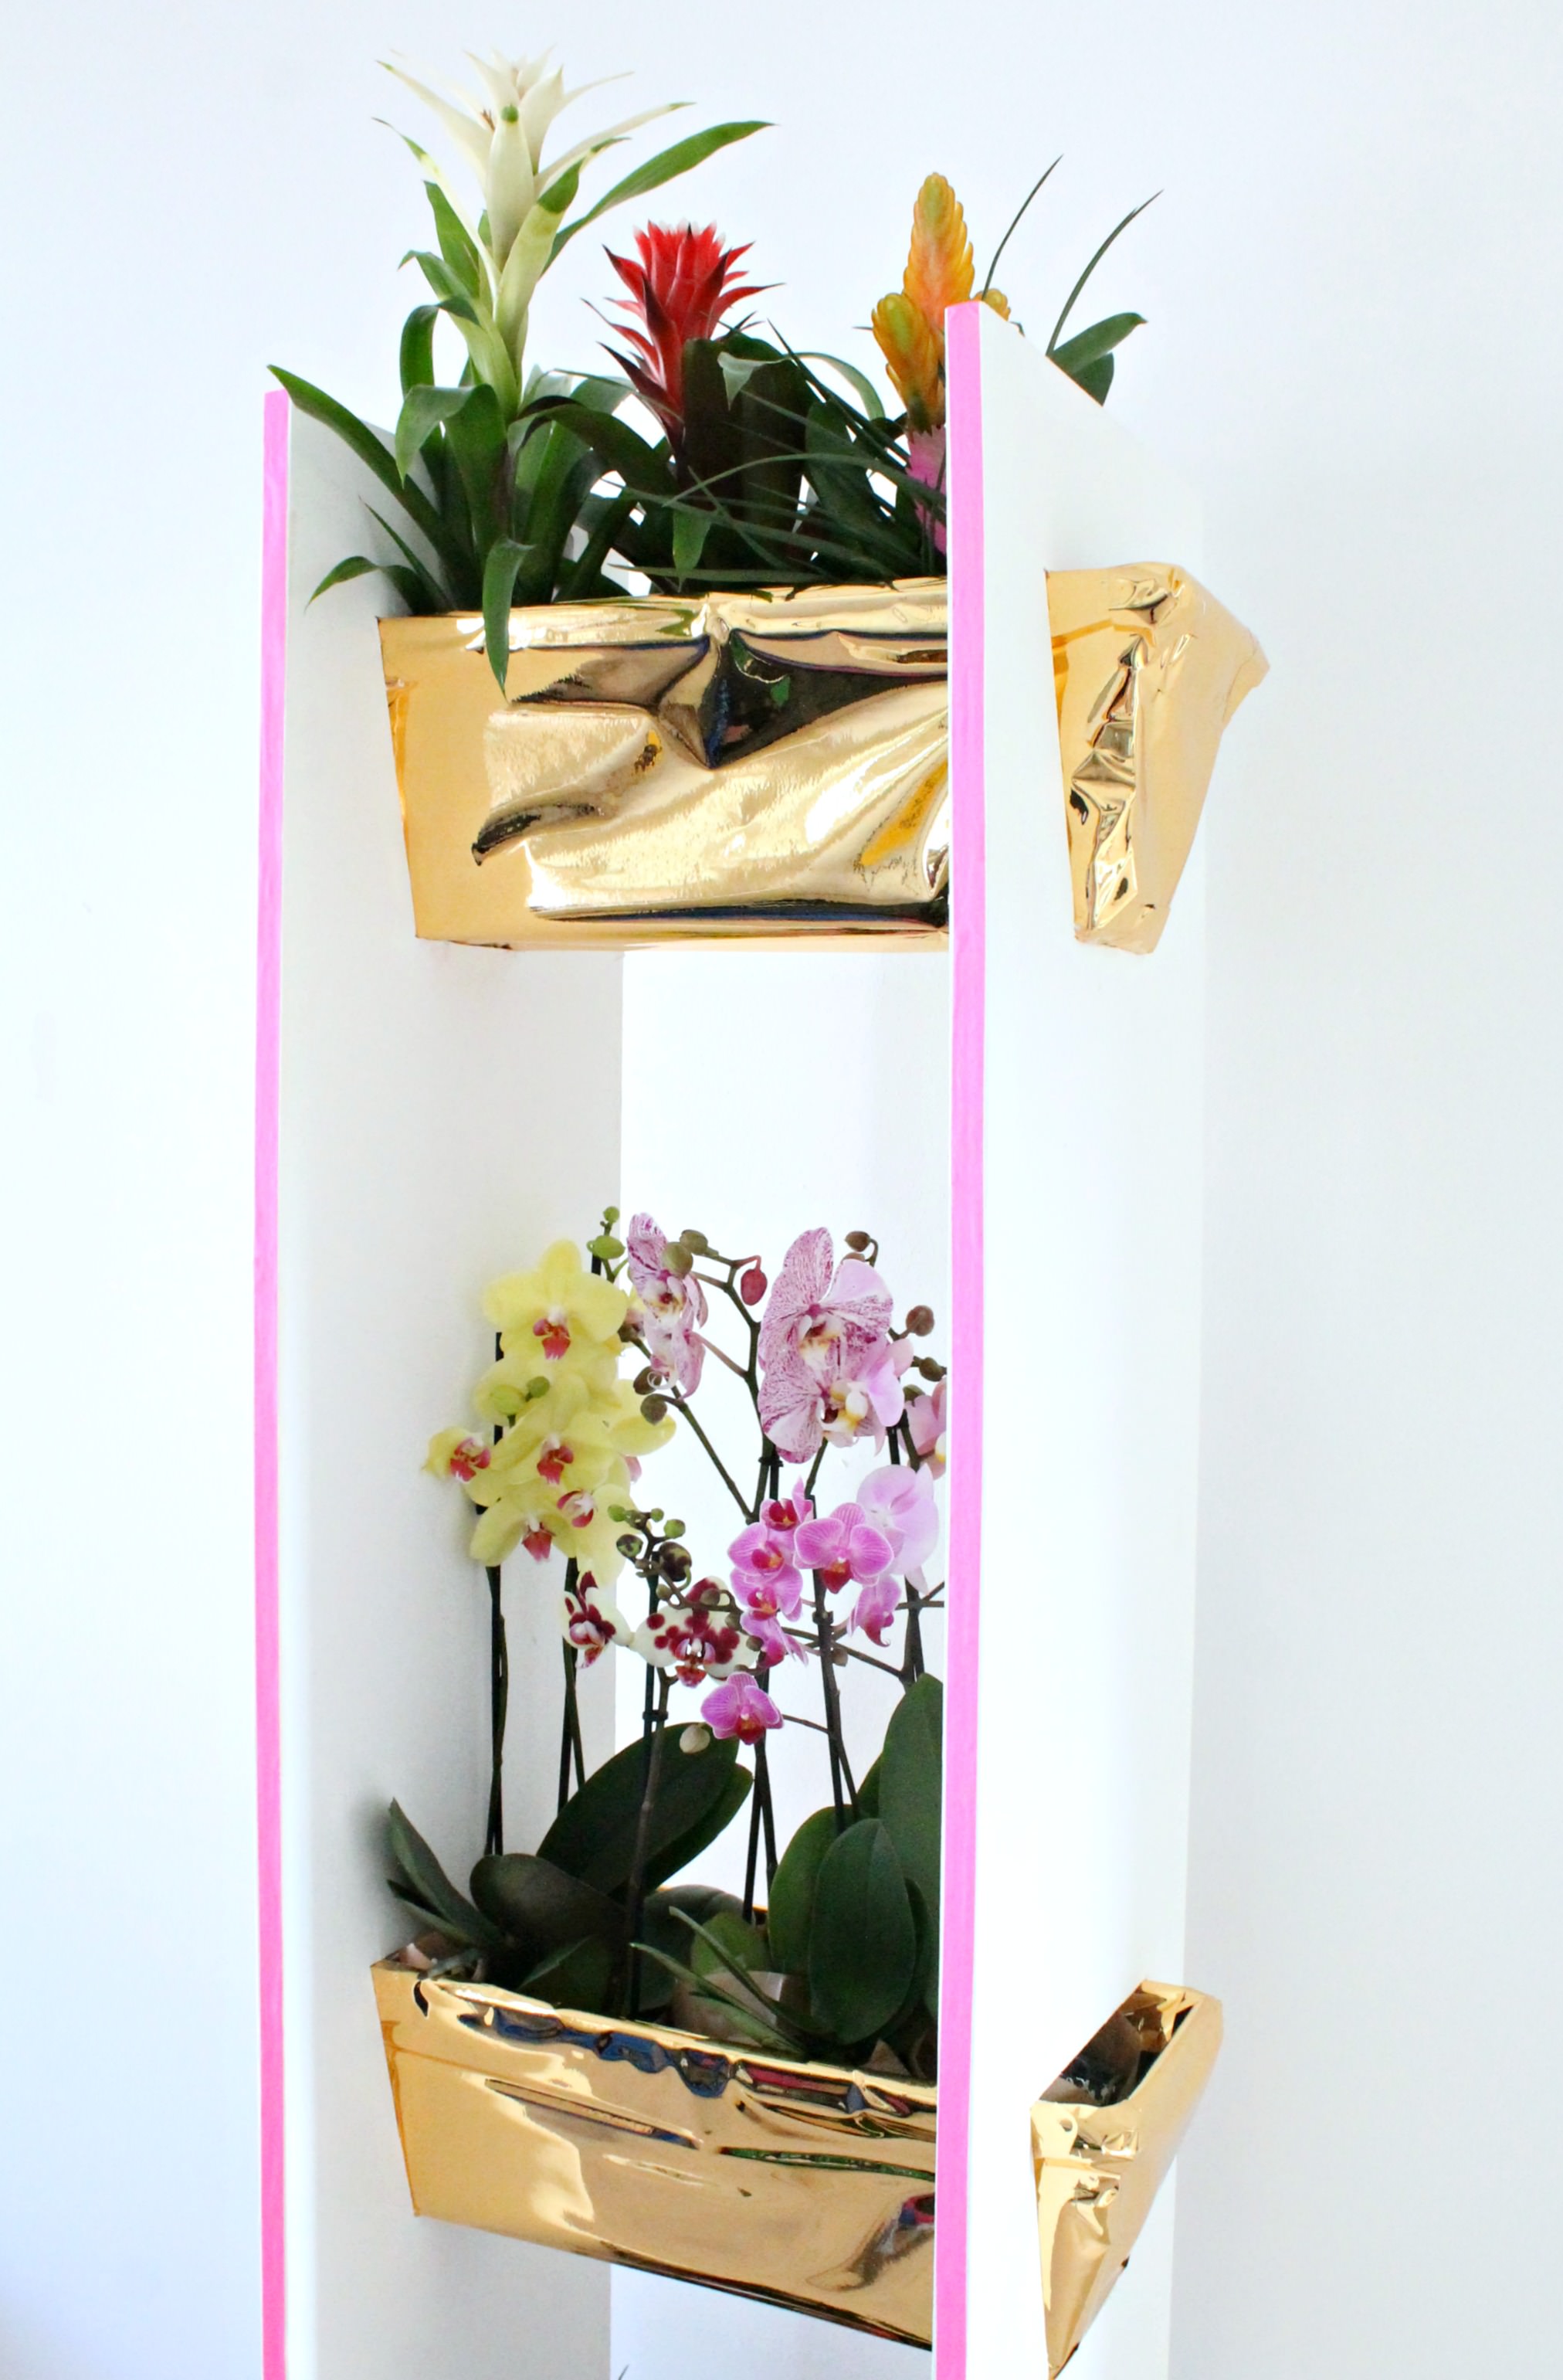 Guzmania-and-orchids-plant-shelf-styled-and-photo-by-Geraldine-Tan-Little-Big-Bell